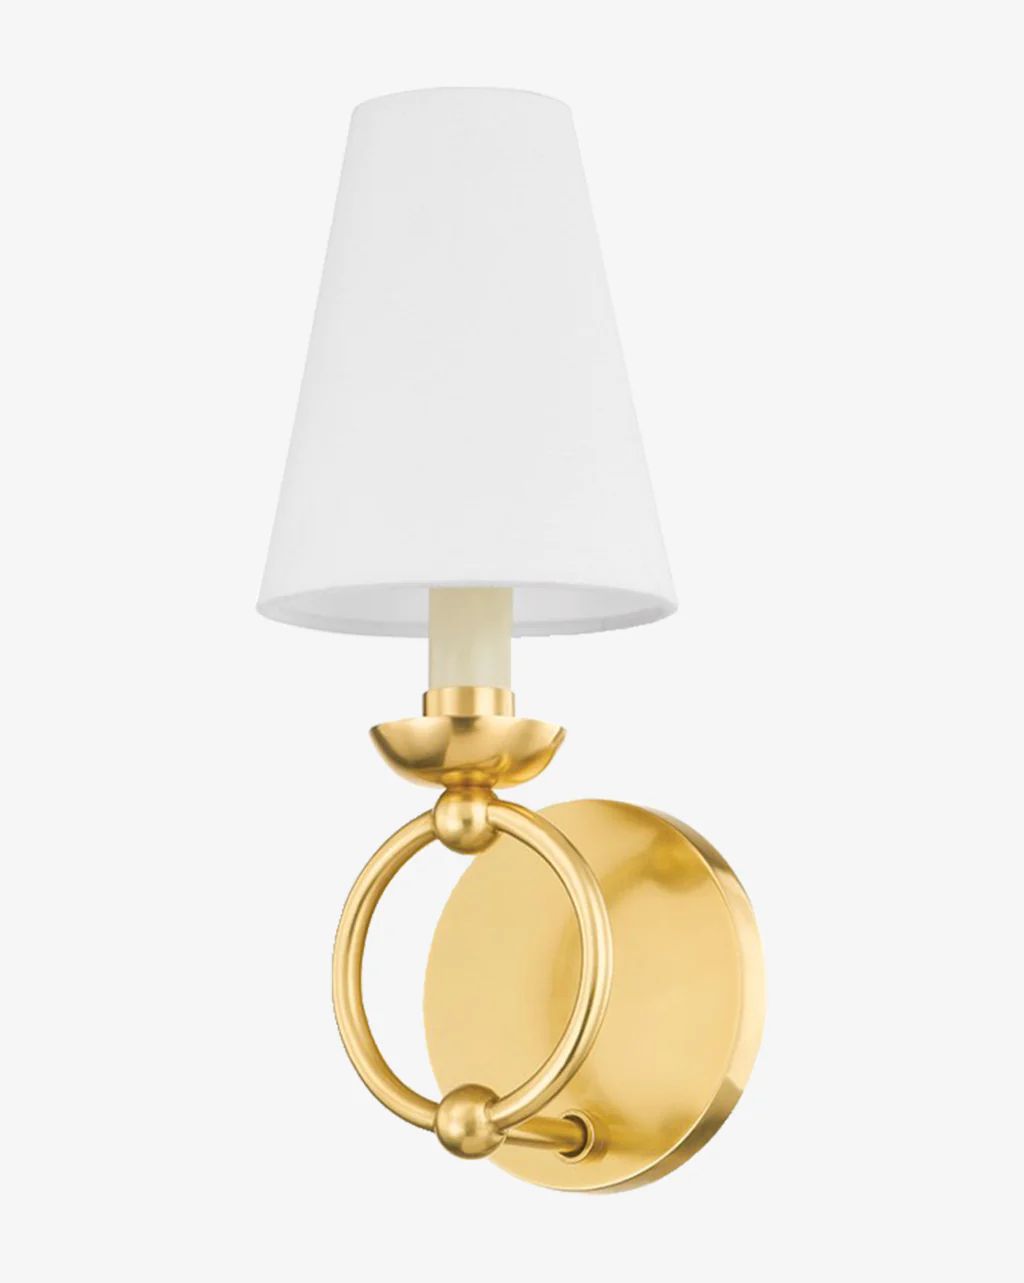 Haverford Sconce | McGee & Co.